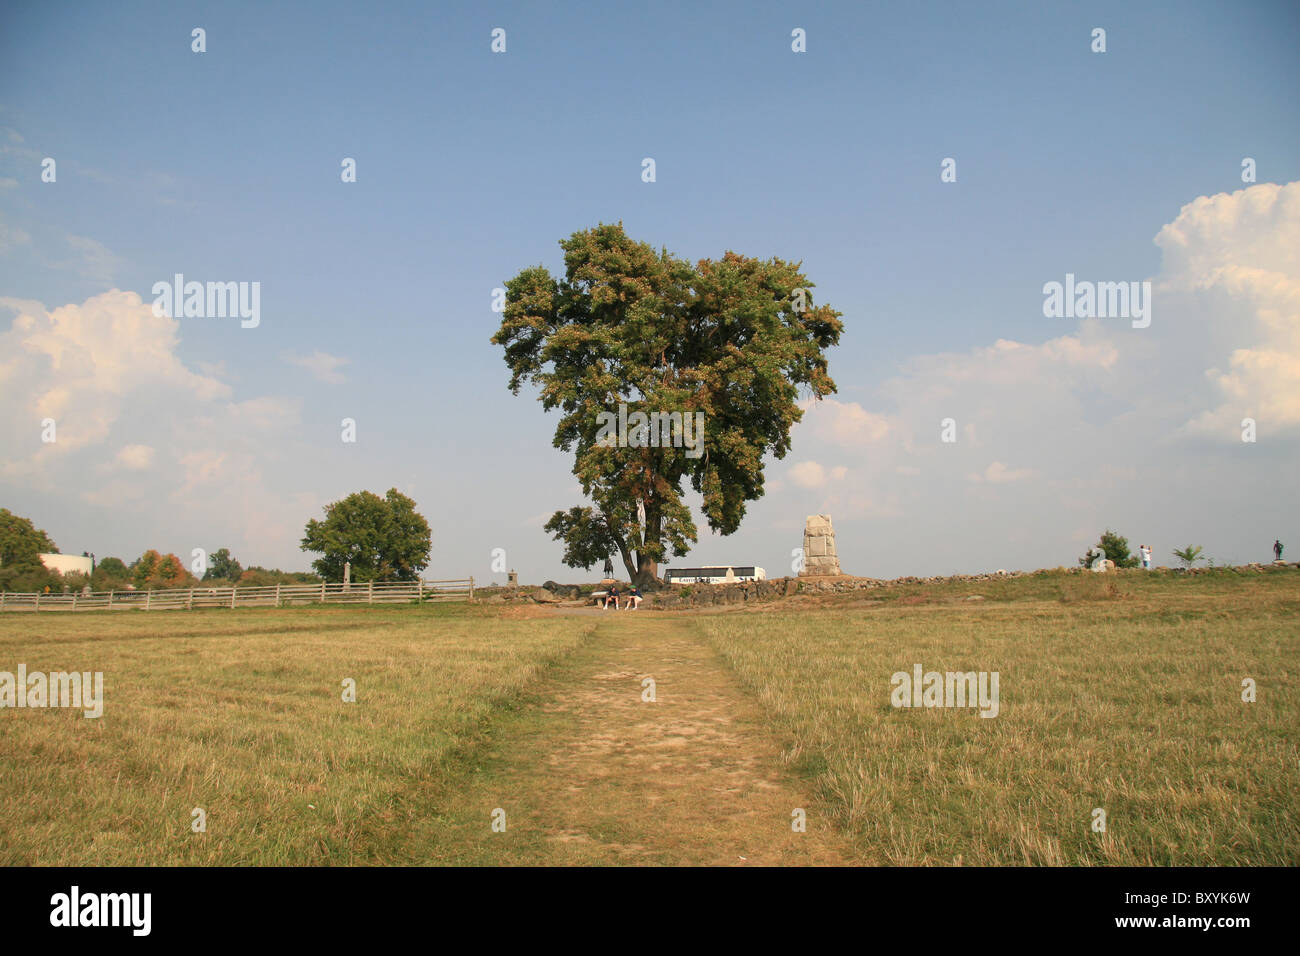 The tree shown marks The Angle which sits on the High Water Mark, Cemetery Ridge, Gettysburg National Military Park. Stock Photo